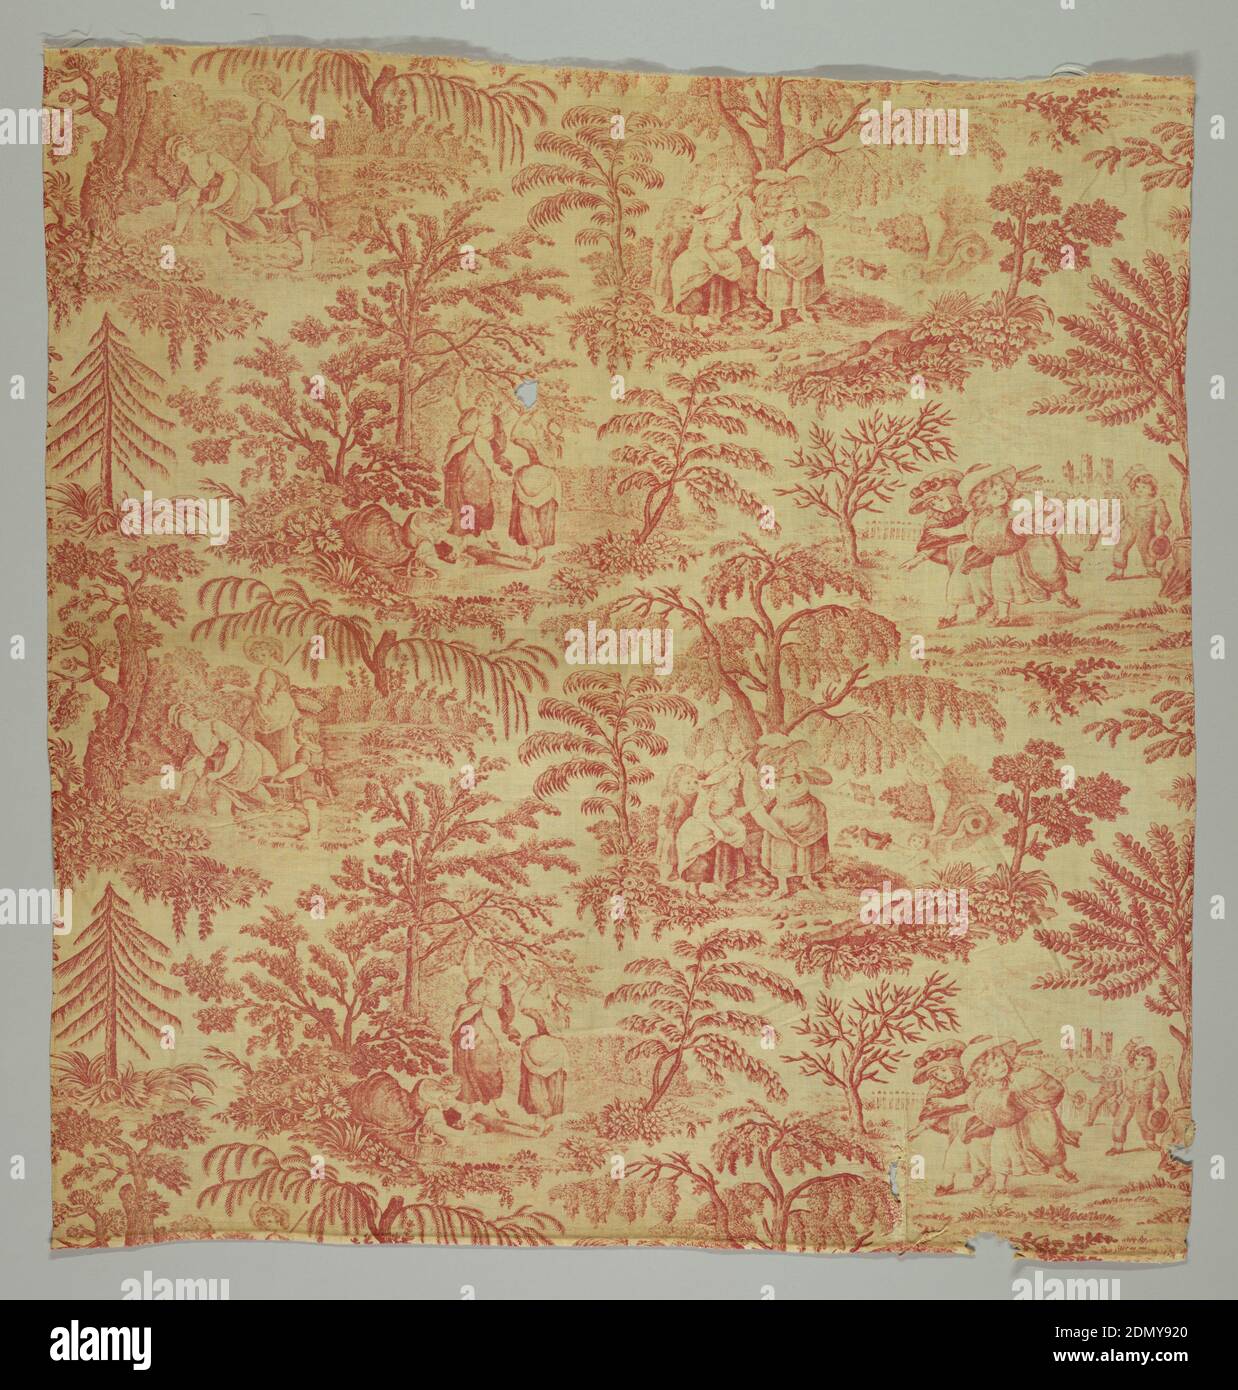 Textile, Medium: cotton Technique: printed by engraved roller on plain weave, Four different scenes of children playing and young women collecting nuts. In red on white., England, 1805–1810, printed, dyed & painted textiles, Textile Stock Photo